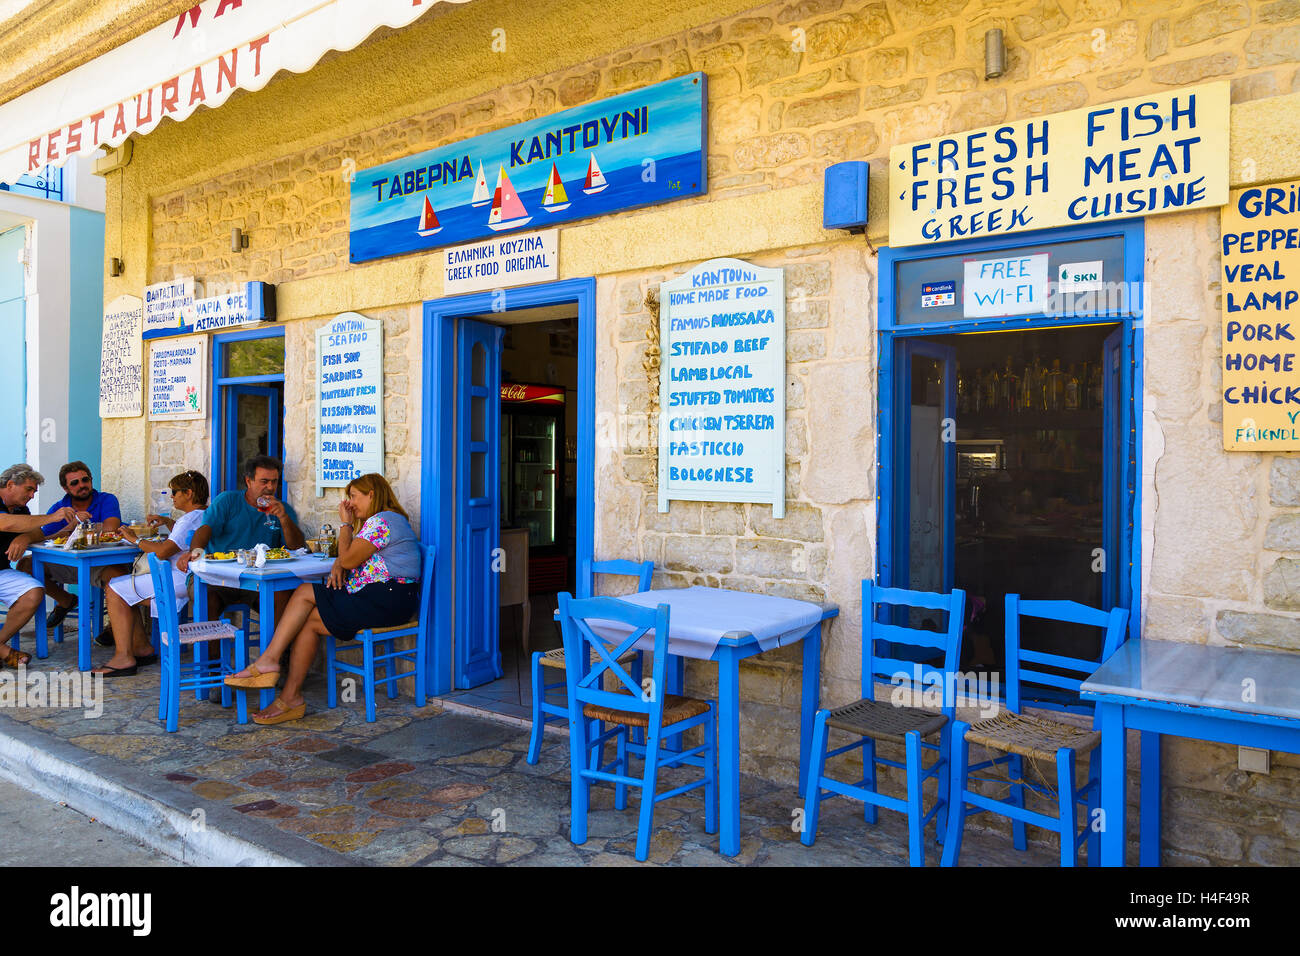 VATHY TOWN, ITHAKA ISLAND, GREECE - SEP 17, 2014: people sitting in traditional Greek restaurant in seaside town Vathy. Greece is famouse for great food served in taverns. Stock Photo